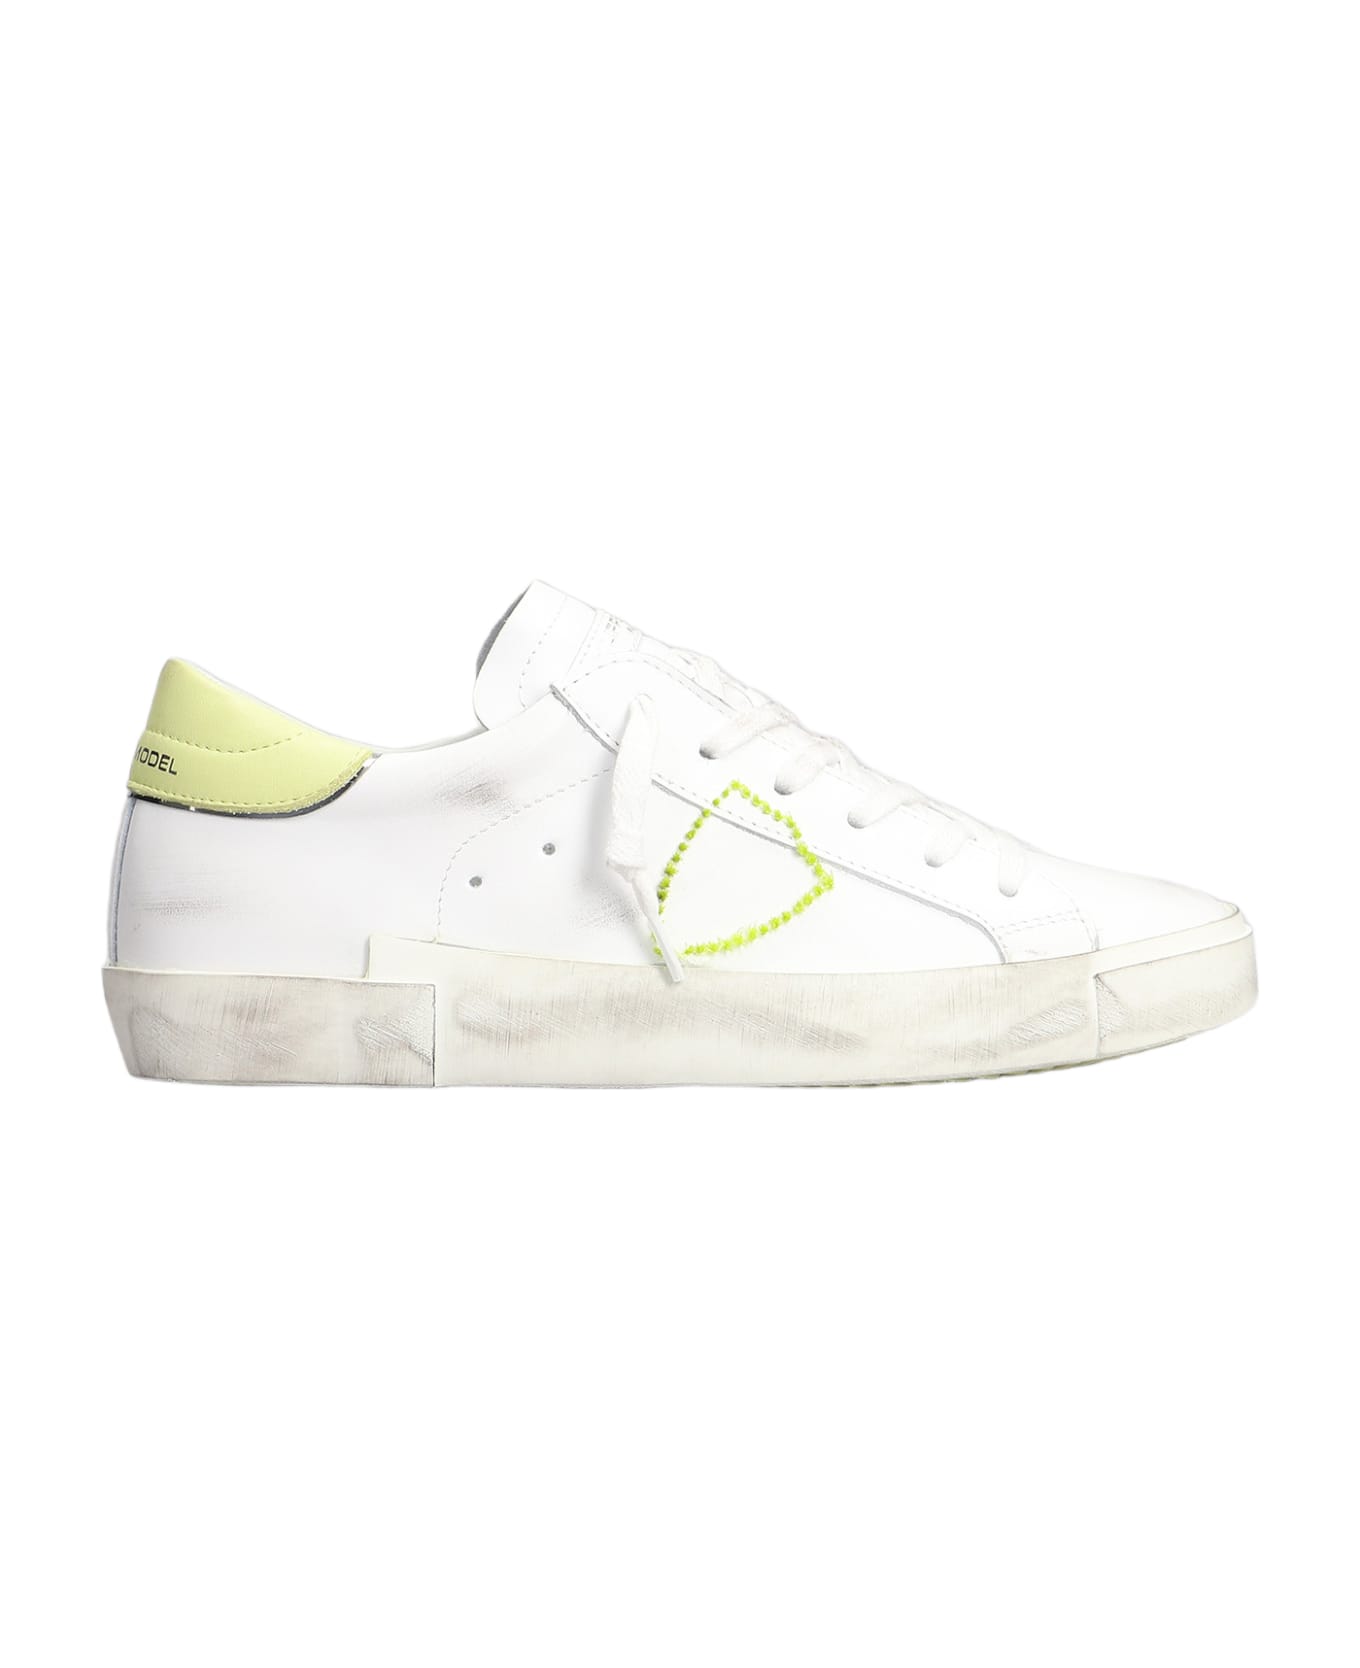 Philippe Model Prsx Sneakers In White Leather スニーカー